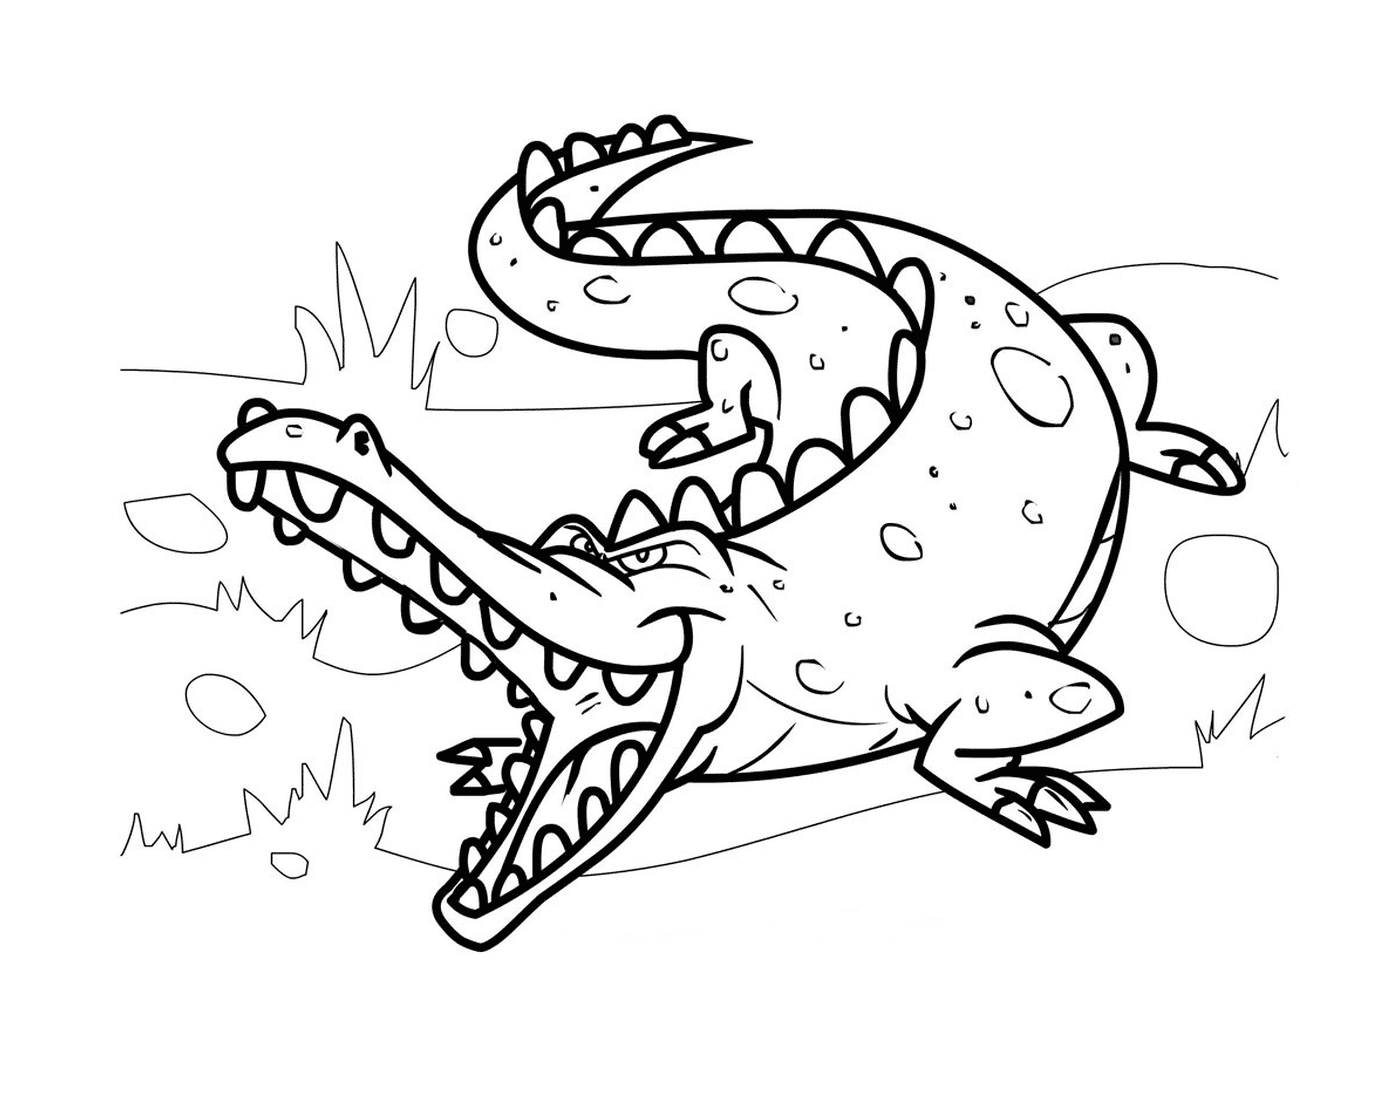  A mean crocodile in its natural habitat, in Cartoon style 